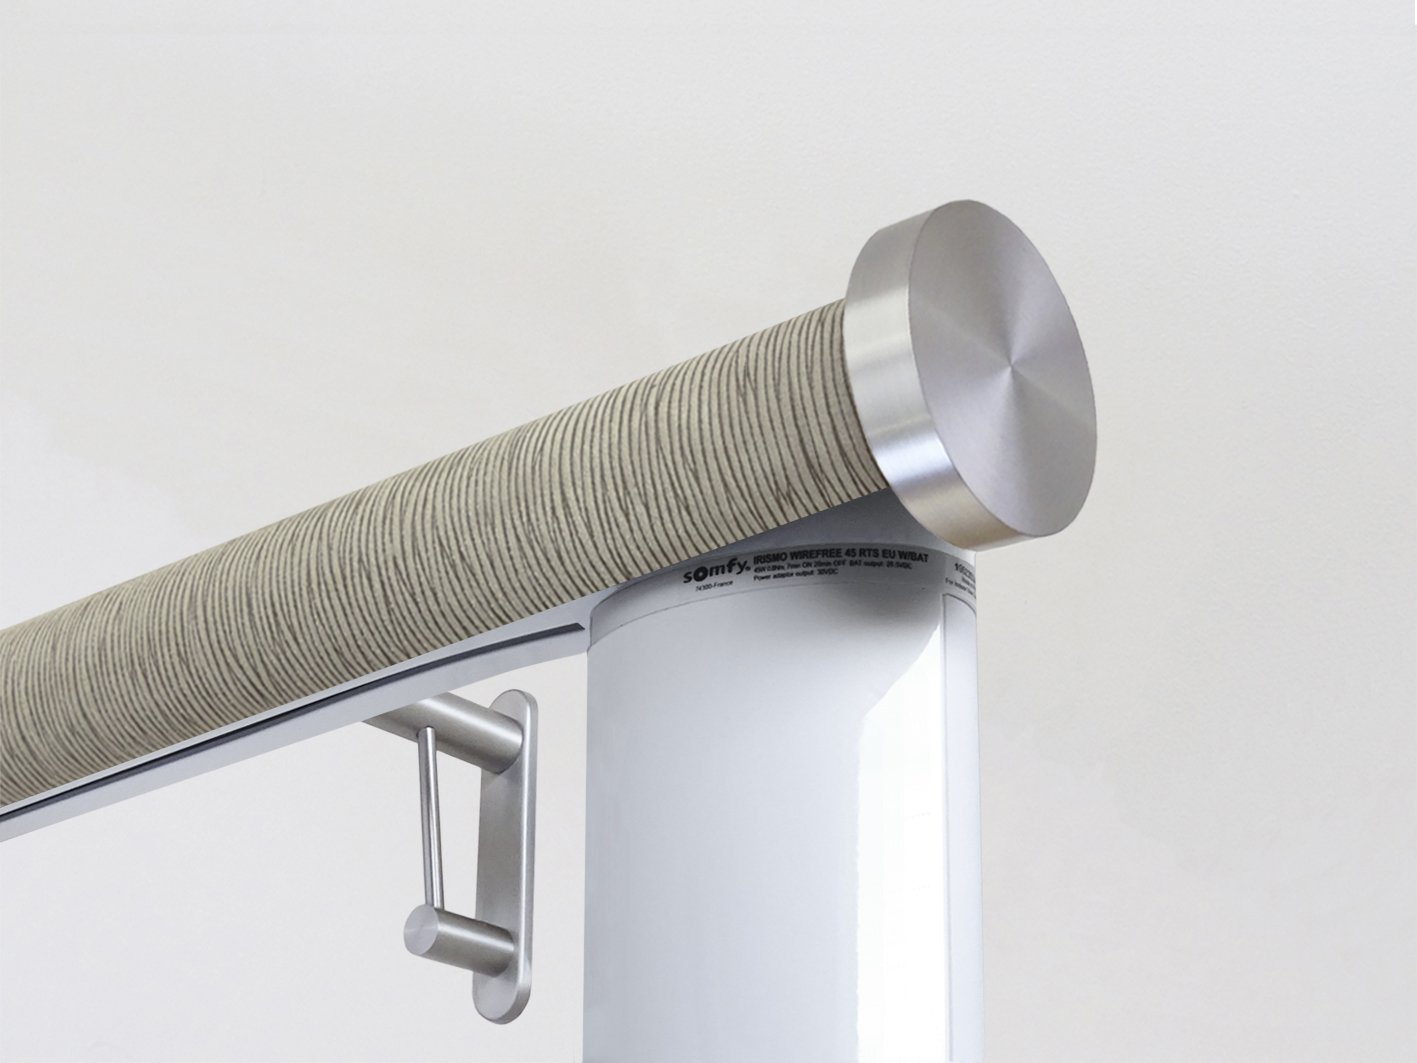 Motorised electric curtain pole in shale green, wireless & battery powered using the Somfy Glydea track | Walcot House UK curtain pole specialists